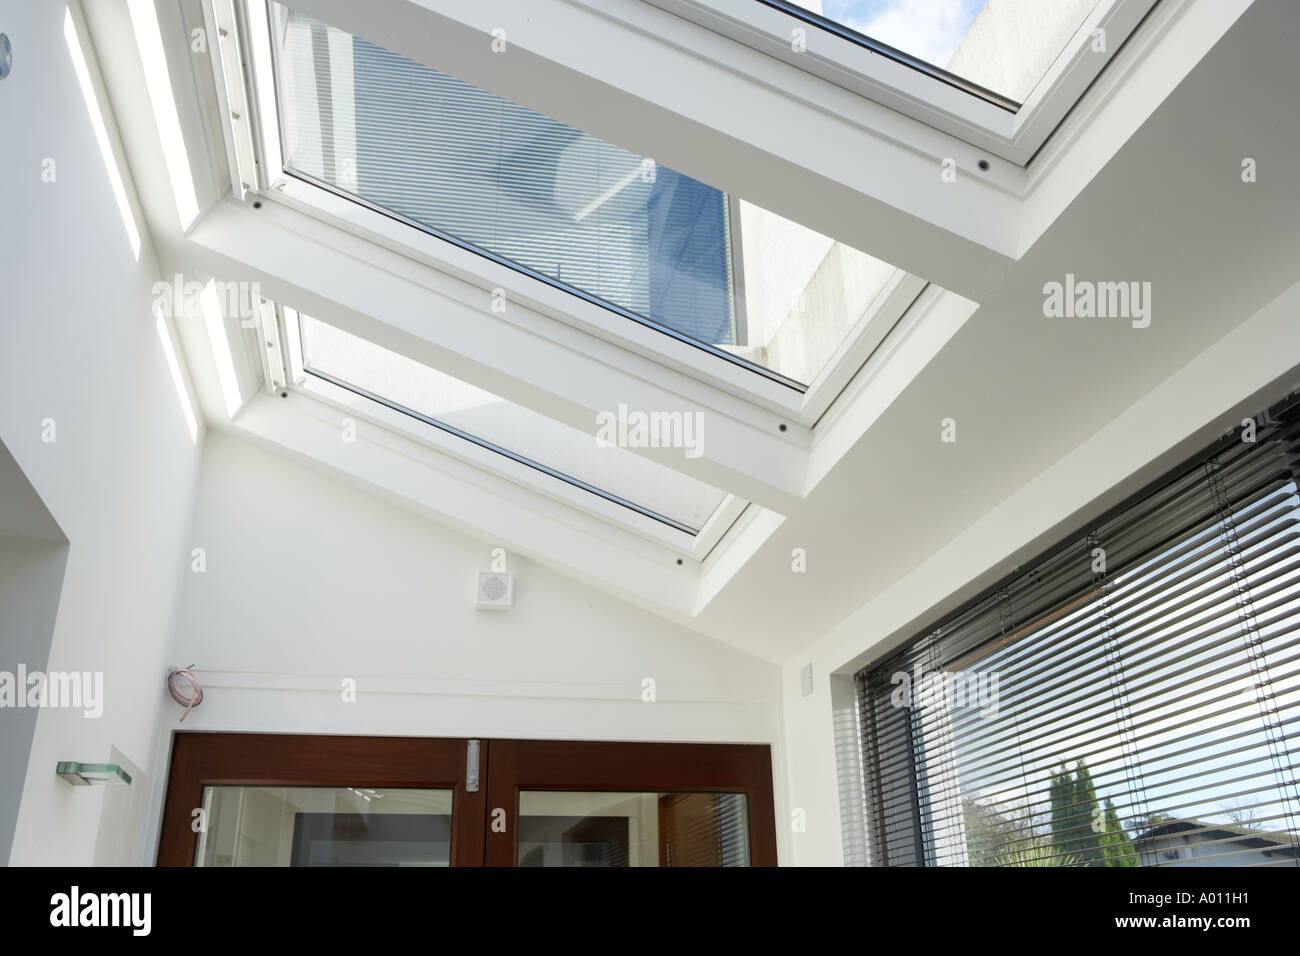 automatic velux windows in conservatory of new open plan house Stock Photo